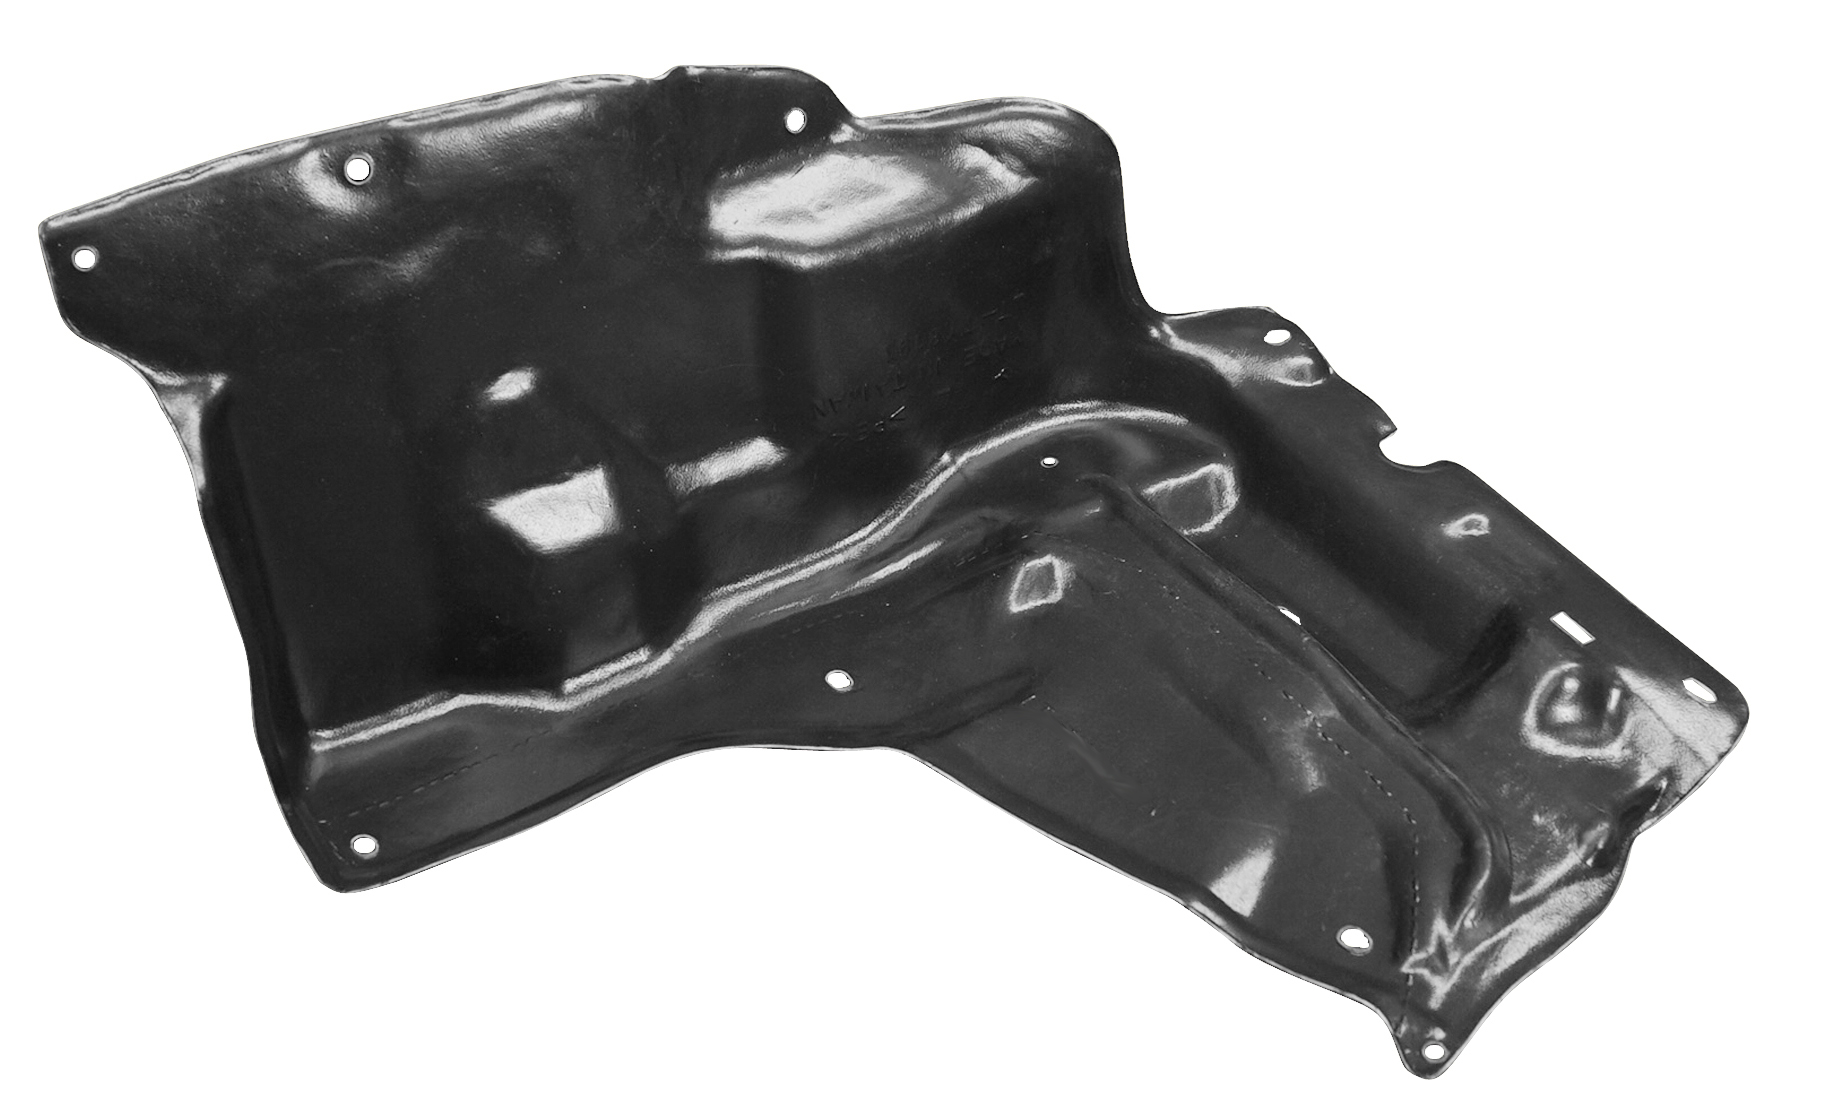 Aftermarket UNDER ENGINE COVERS for TOYOTA - COROLLA, COROLLA,14-19,Lower engine cover